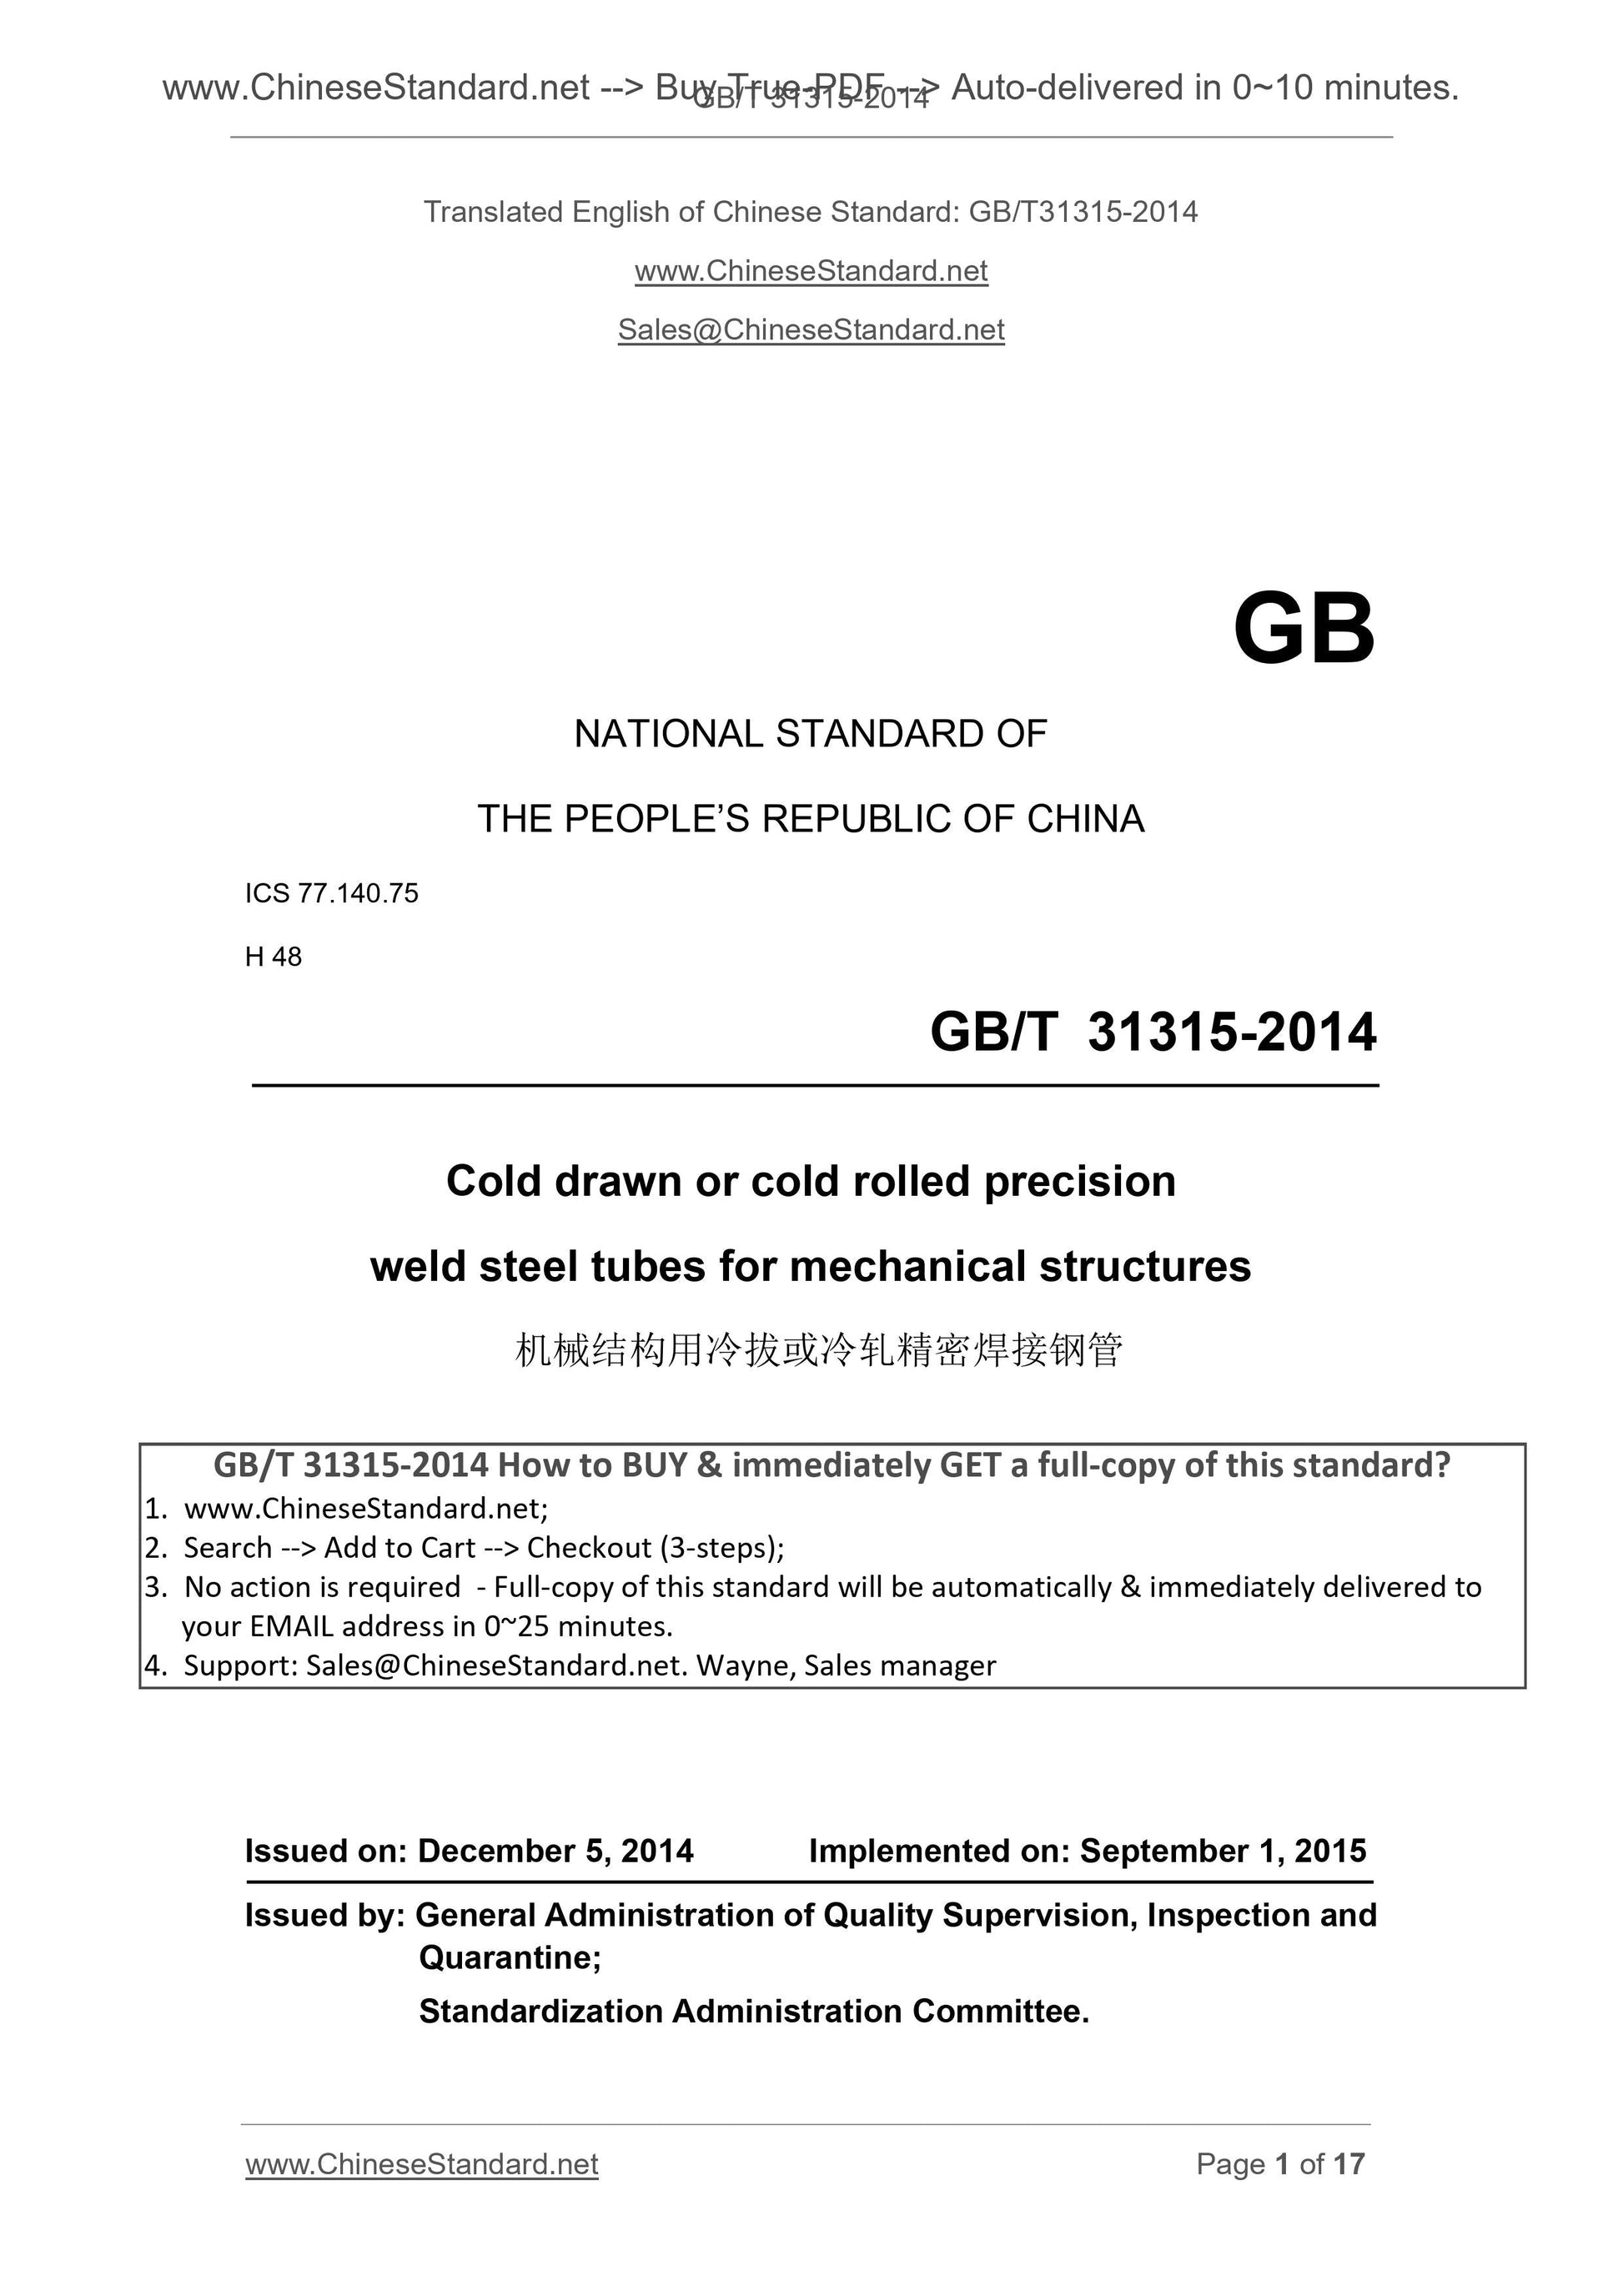 GB/T 31315-2014 Page 1